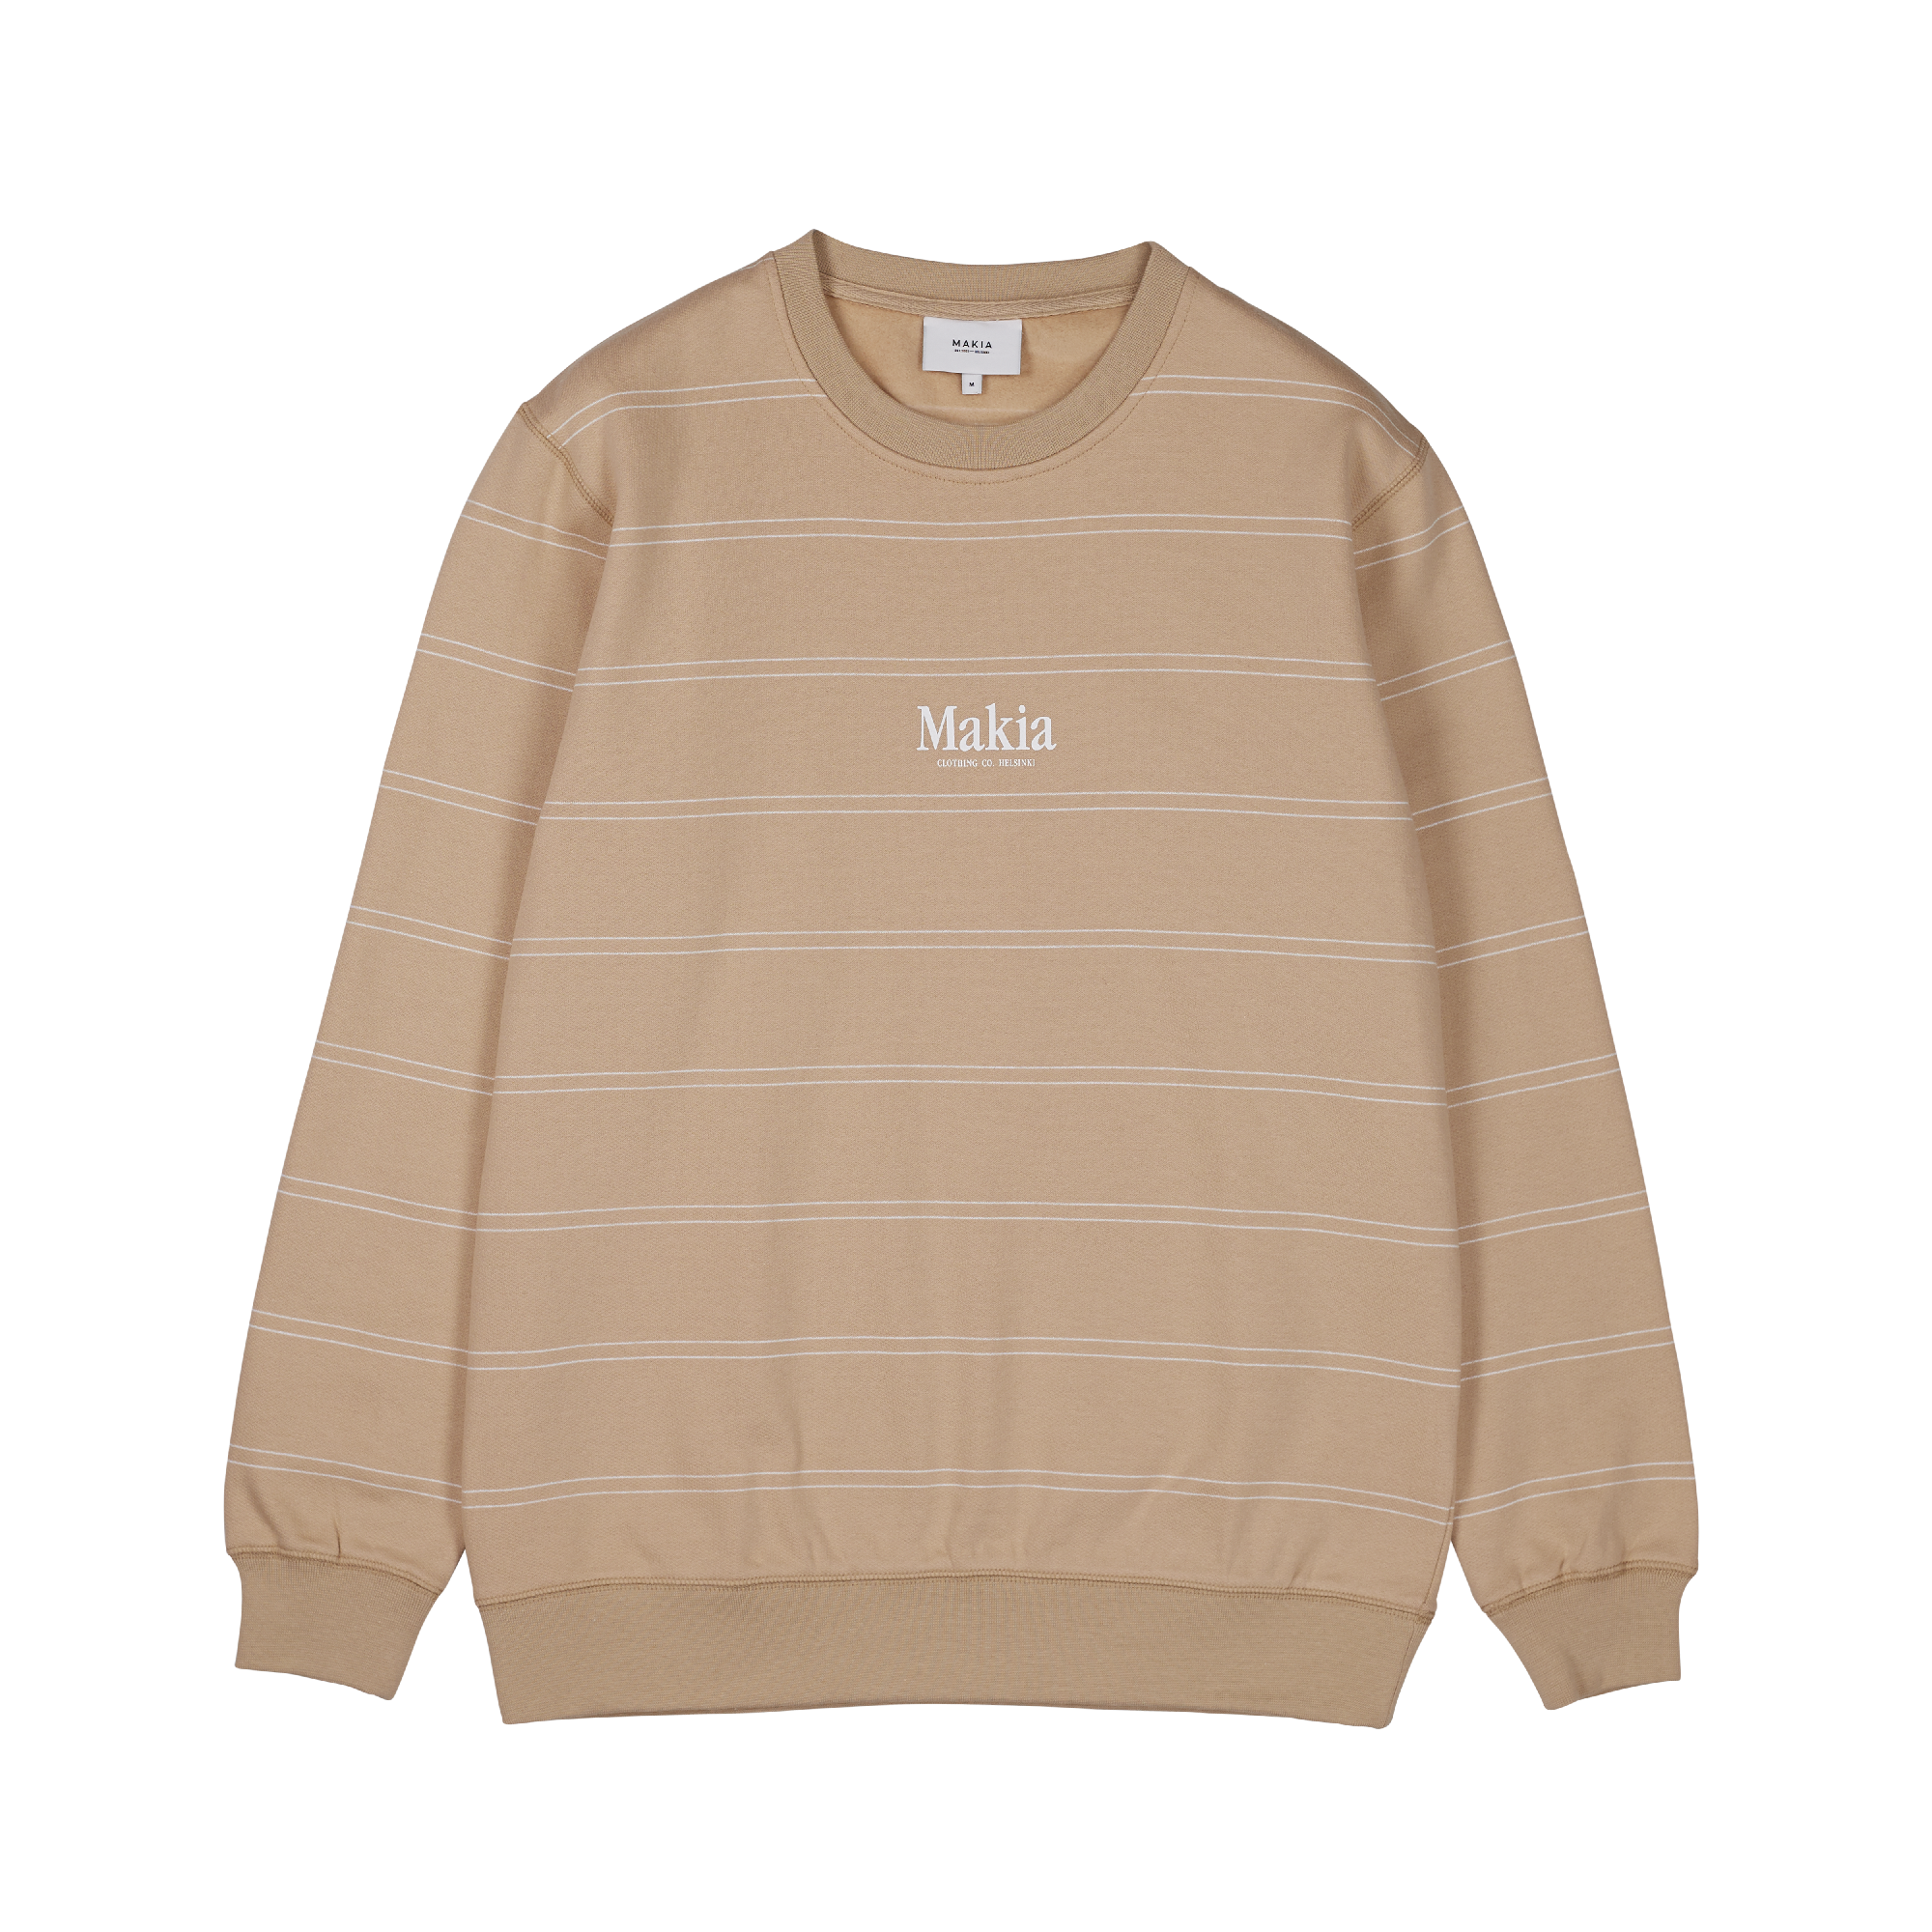 A regular fitting striped sweatshirt with a Makia logo print on chest.